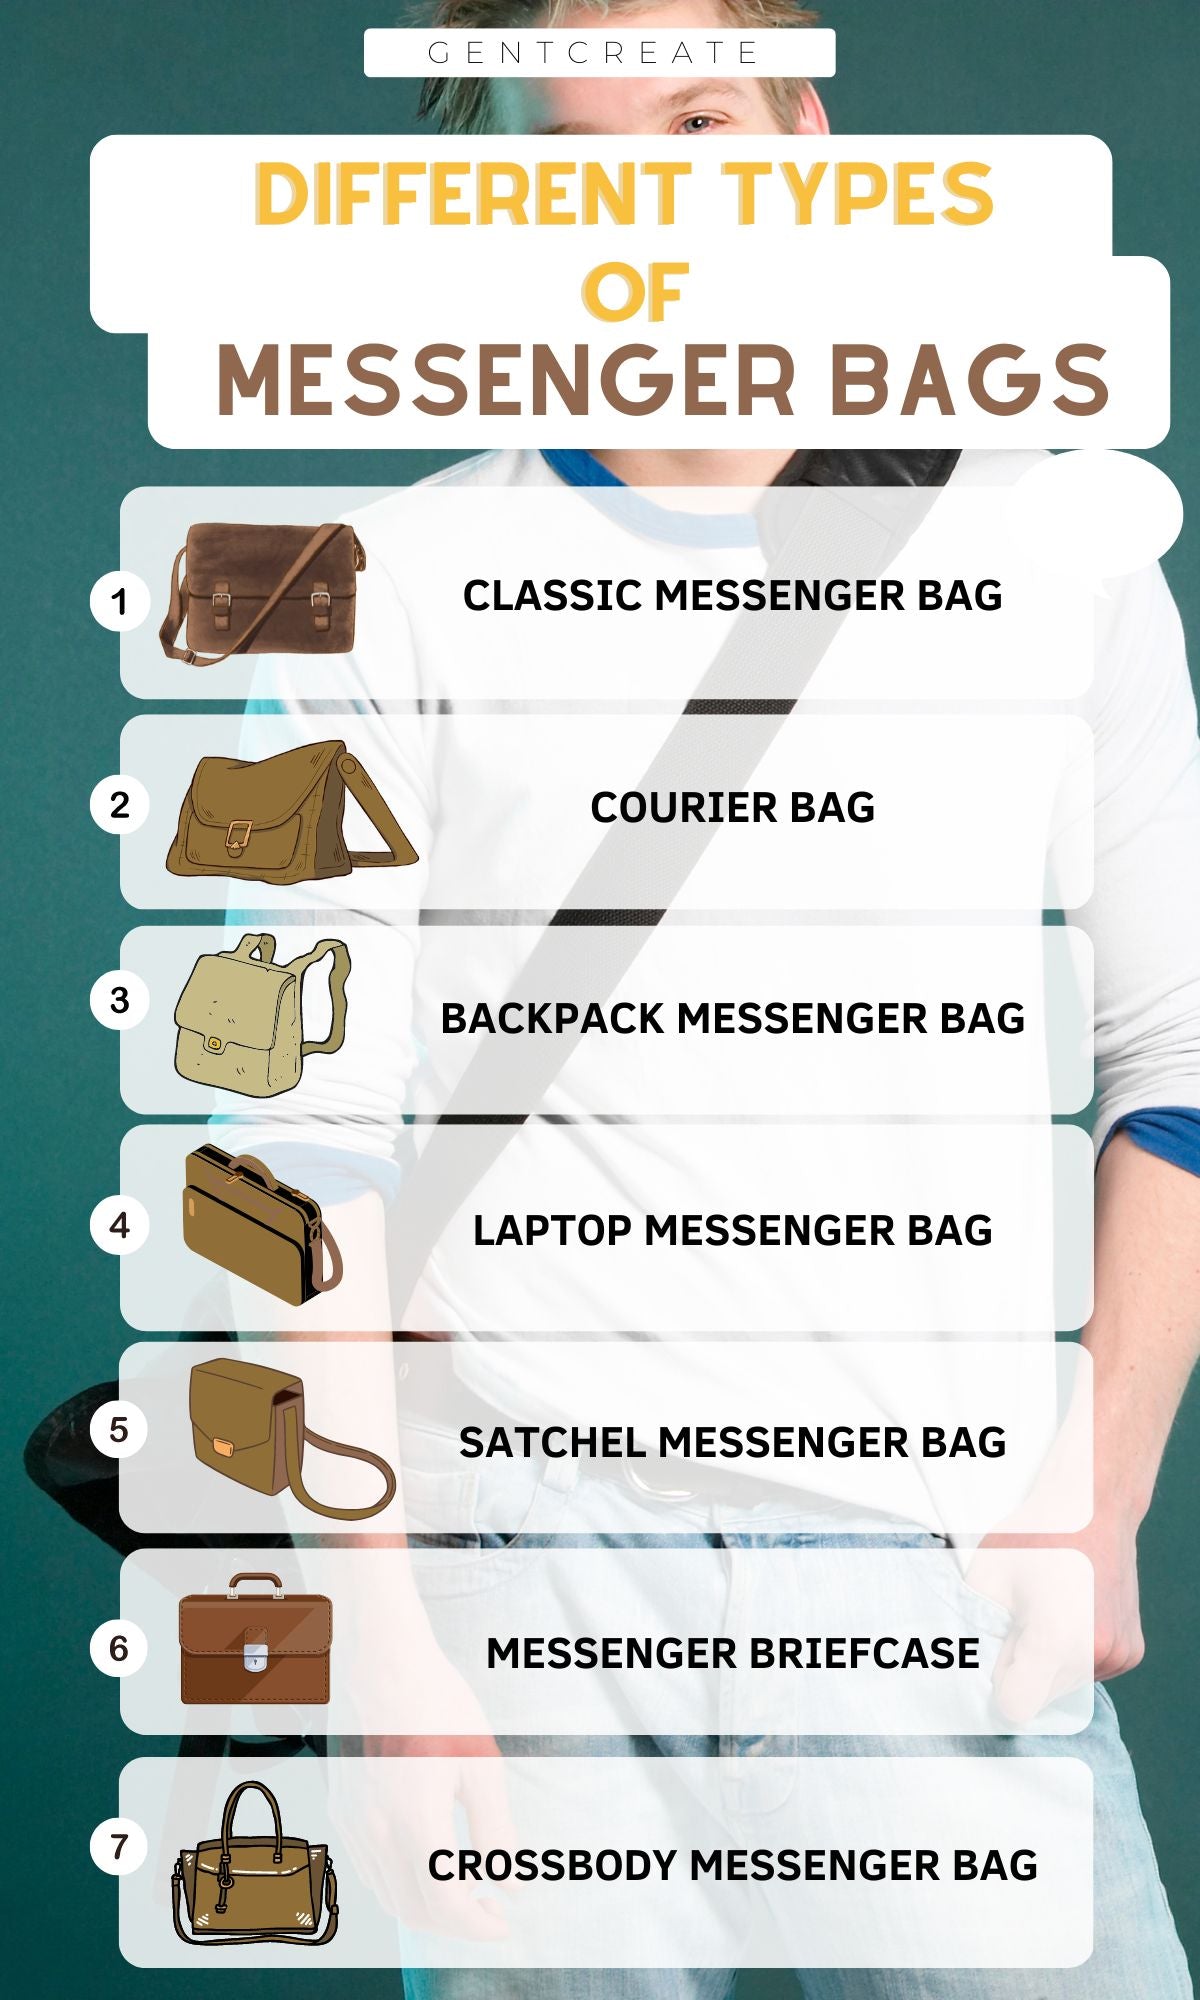 Which Types of Messenger Bags Exist?